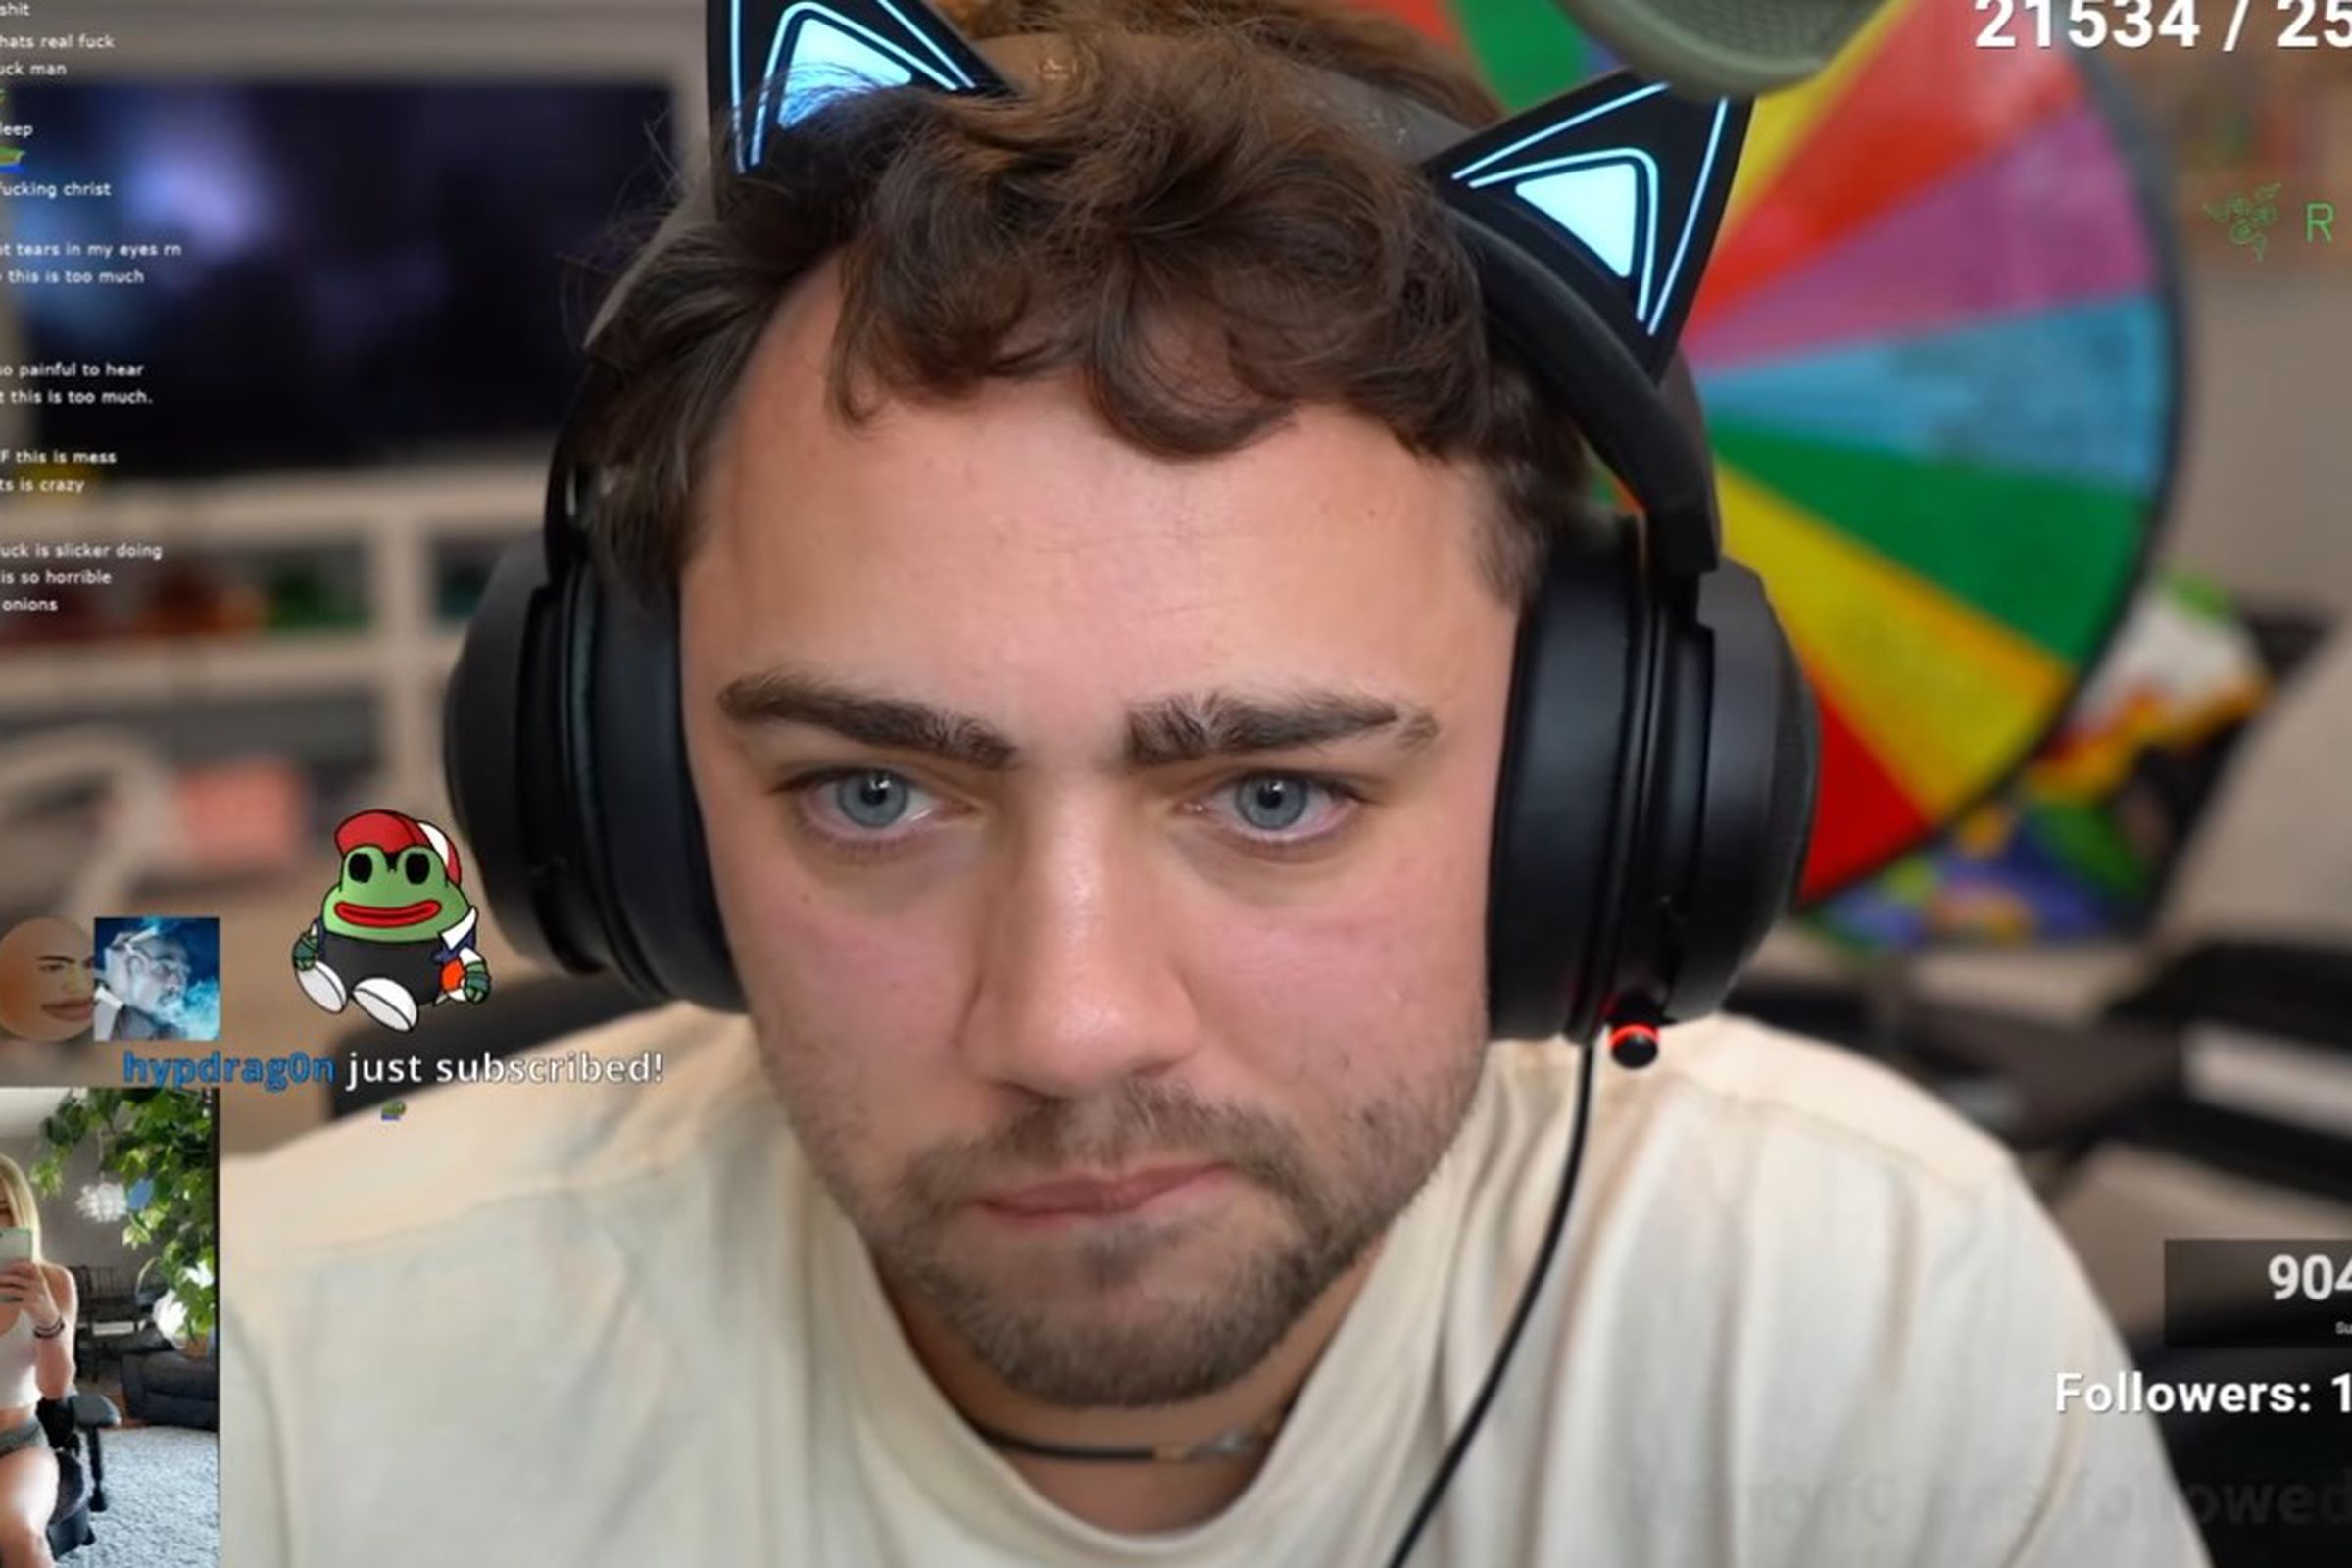 Image of Twitch streamer Mizkif, a brown-haired, fair-skinned male wearing a cream colored t-shirt and black headphones with neon blue cat ears poking up from the band.